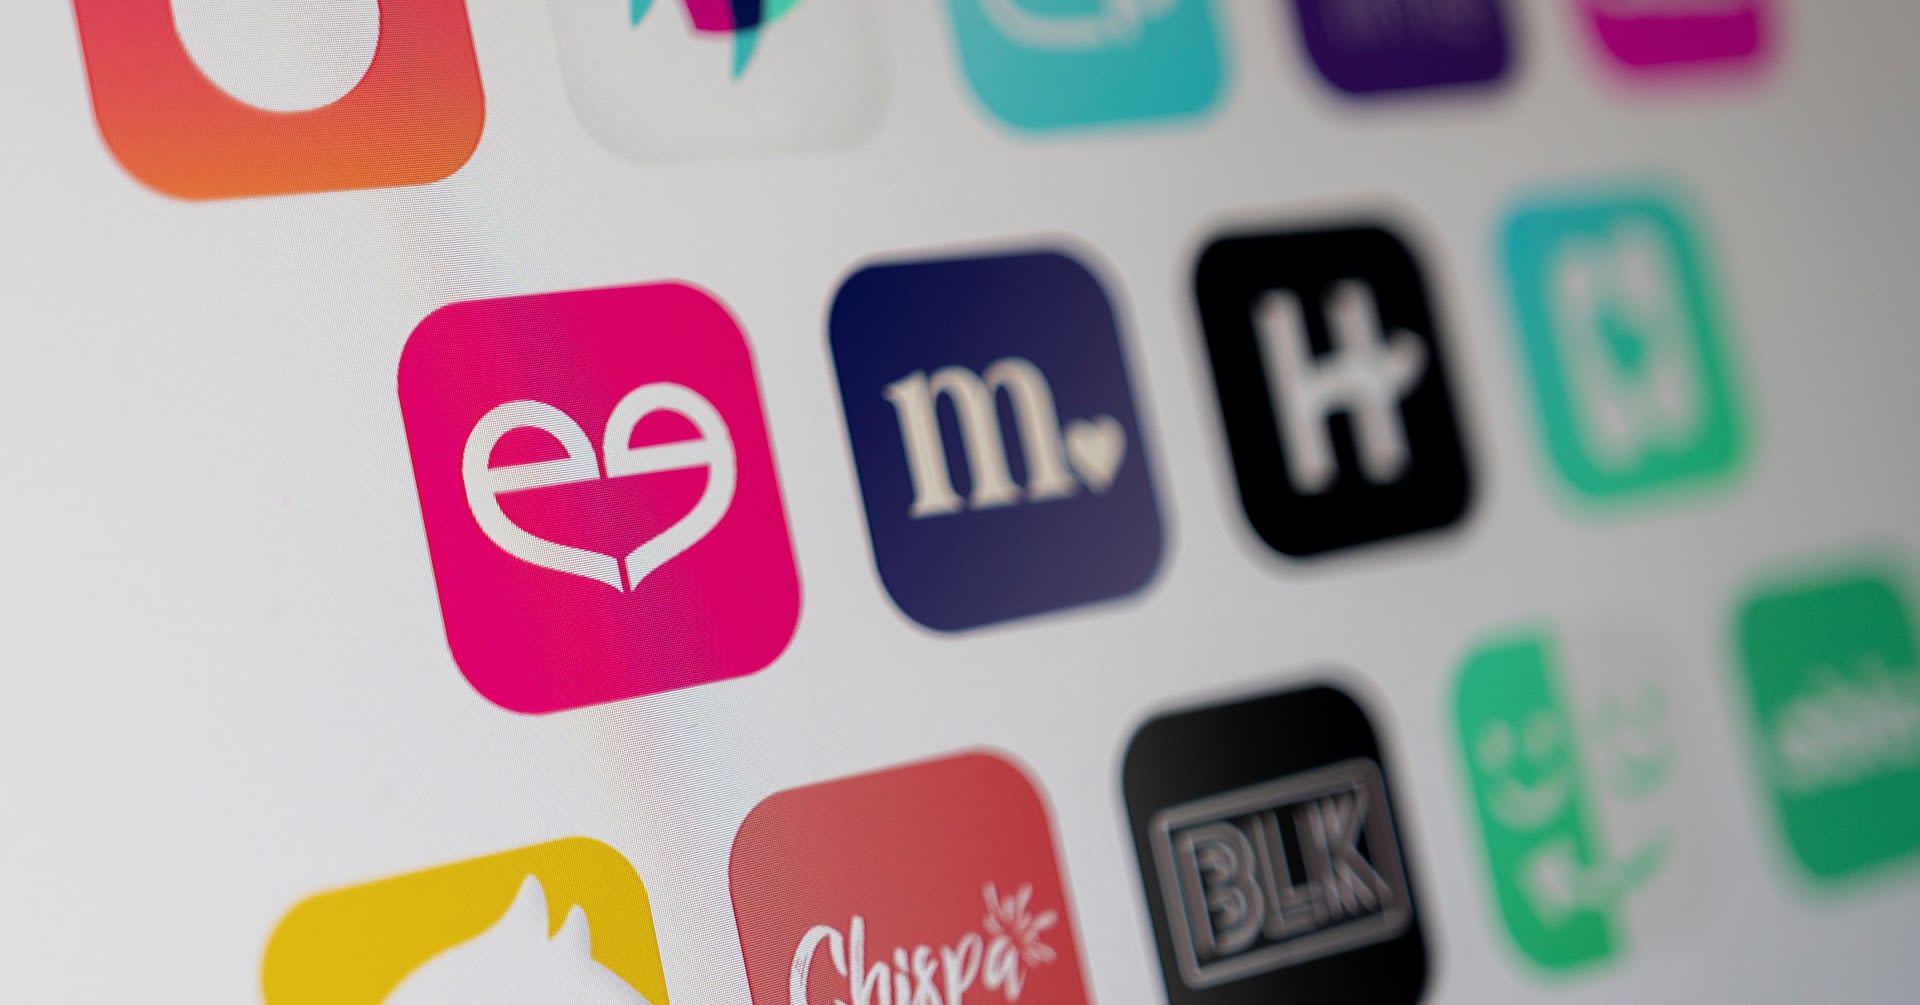 Match Group expects quarterly revenue below estimates as spending on dating apps falls